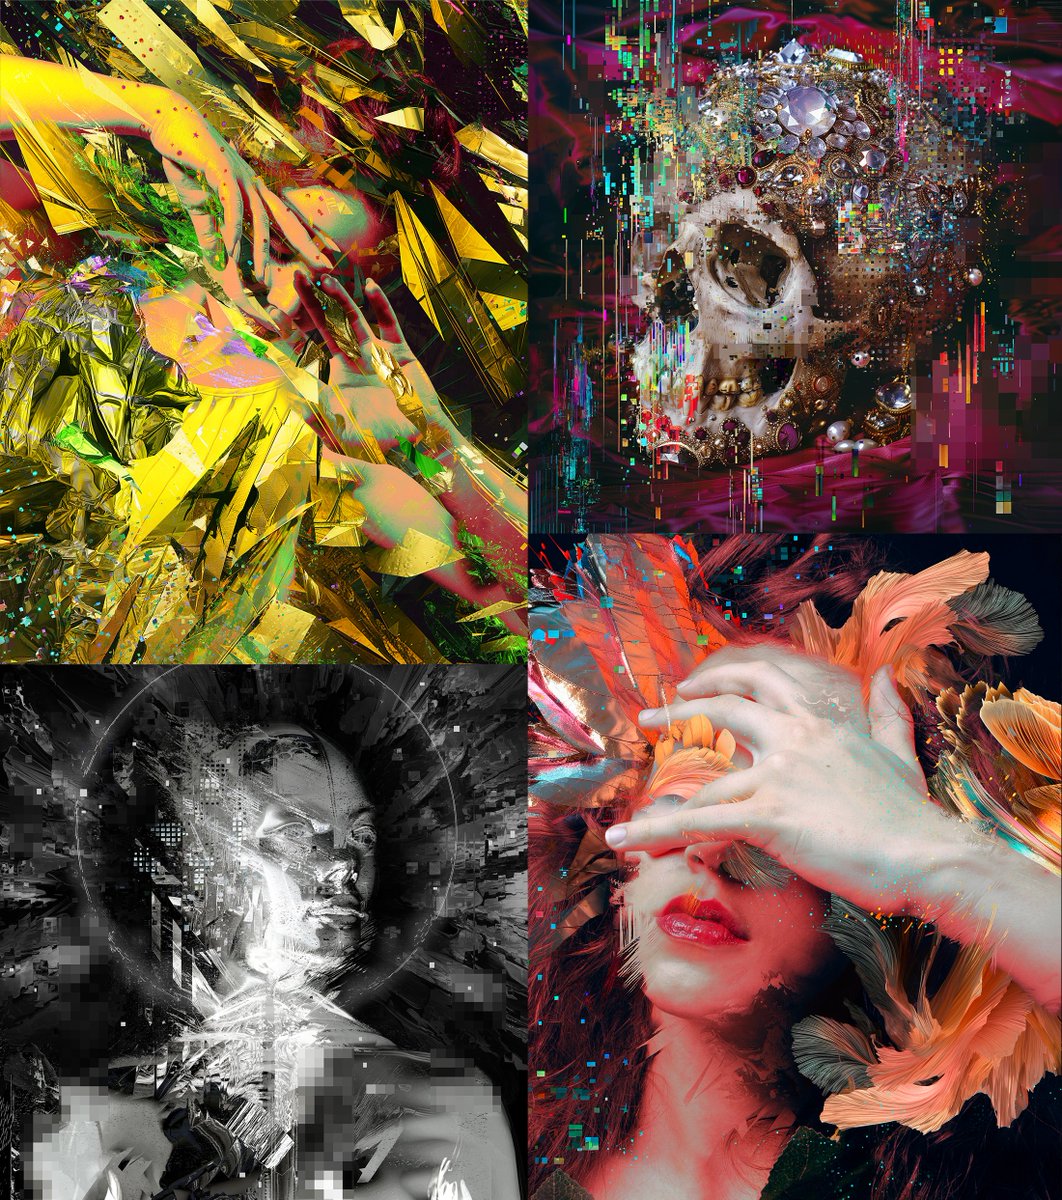 Hi! My name is Marta and I'm a multidisciplinary artist experimenting with glitch aesthetics and collage to express themes of beauty, memory, decay, and emotion. I like creating multi-layered, detail-rich art that plays on the ideas of chaos and control. My work is available